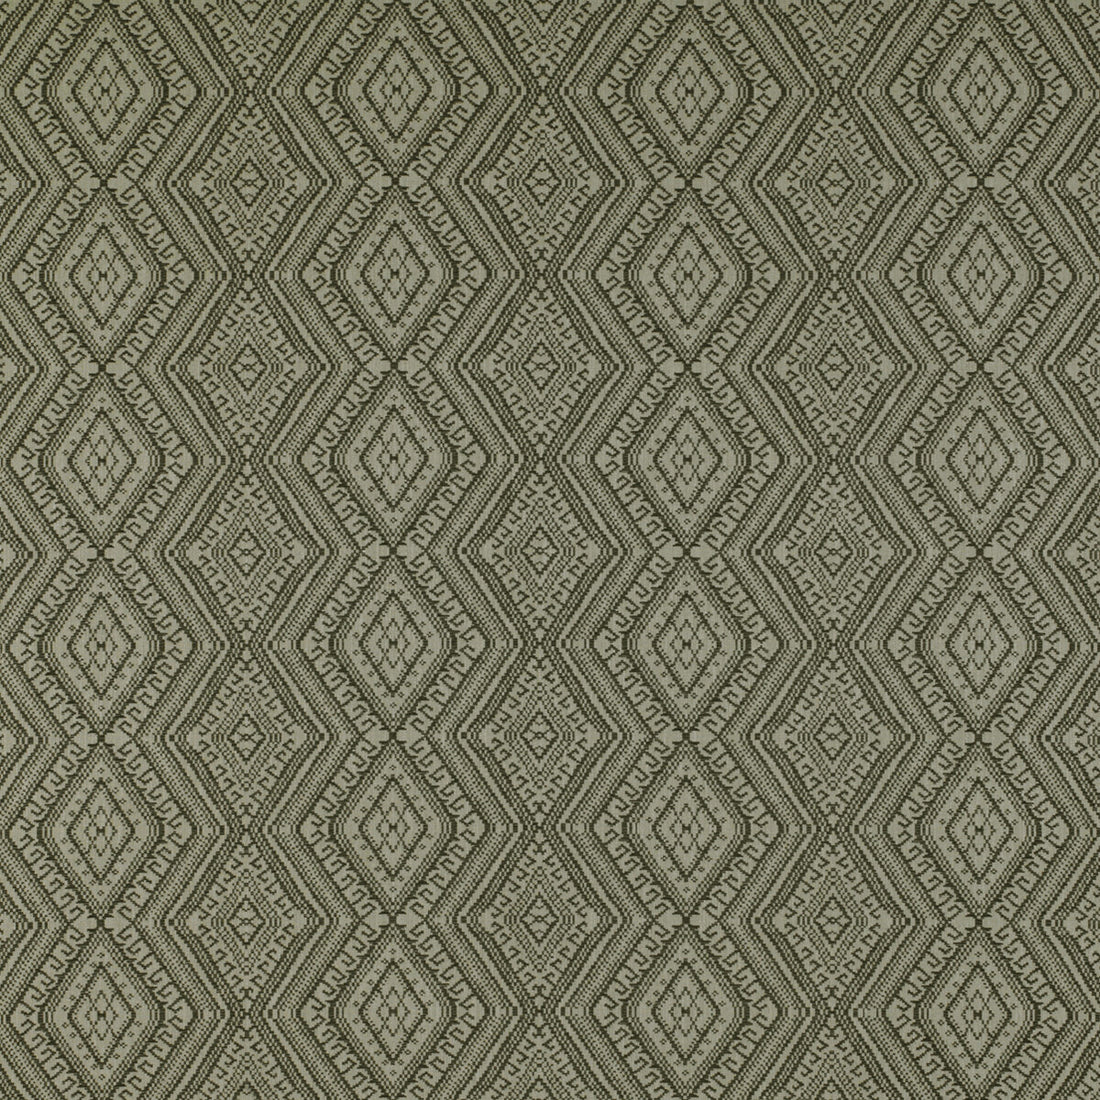 Milan fabric in onyx color - pattern GDT5326.001.0 - by Gaston y Daniela in the Tierras collection